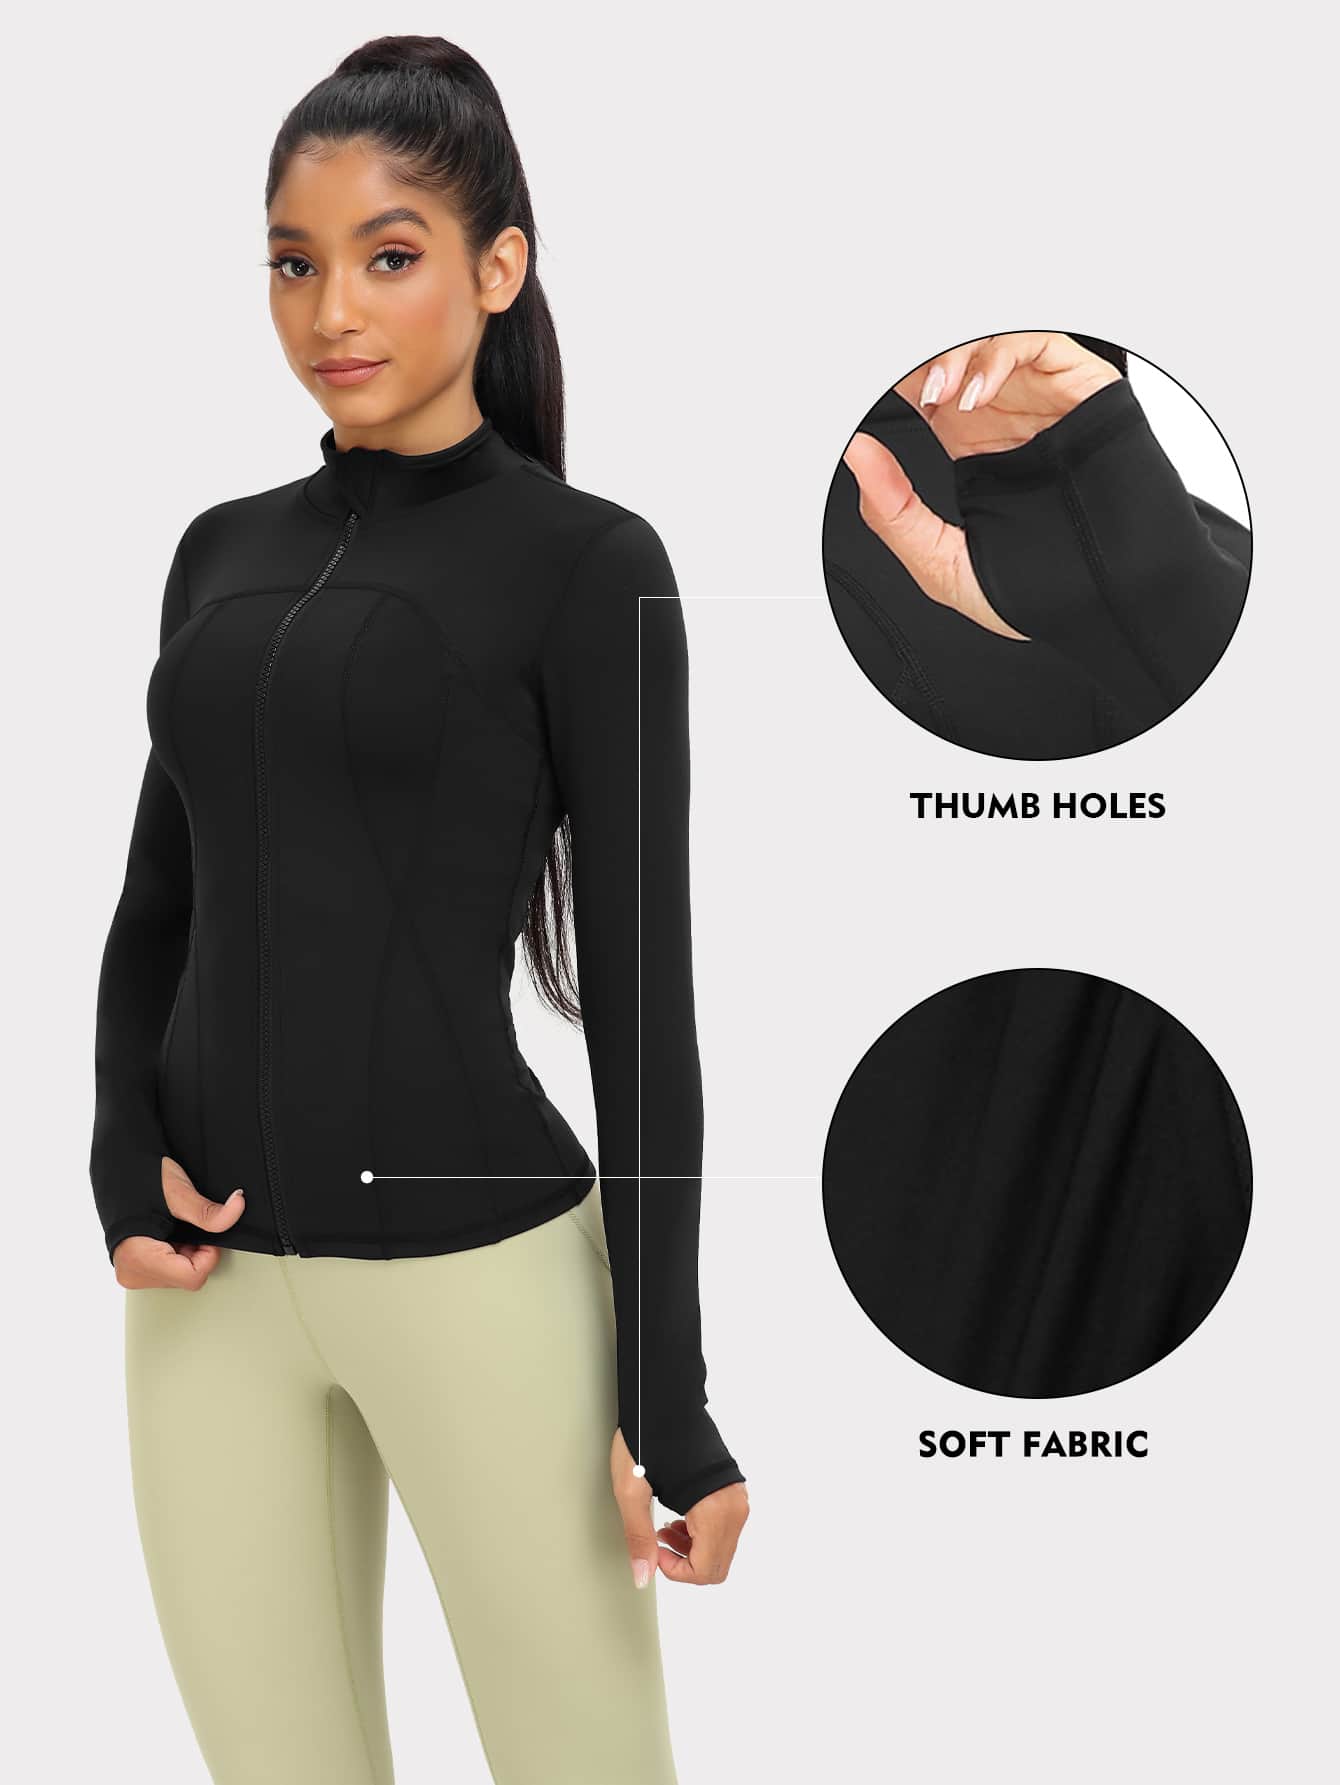 Stay Stylish and Comfortable: Women's Slim Fit Sports Jacket with Thumb Holes